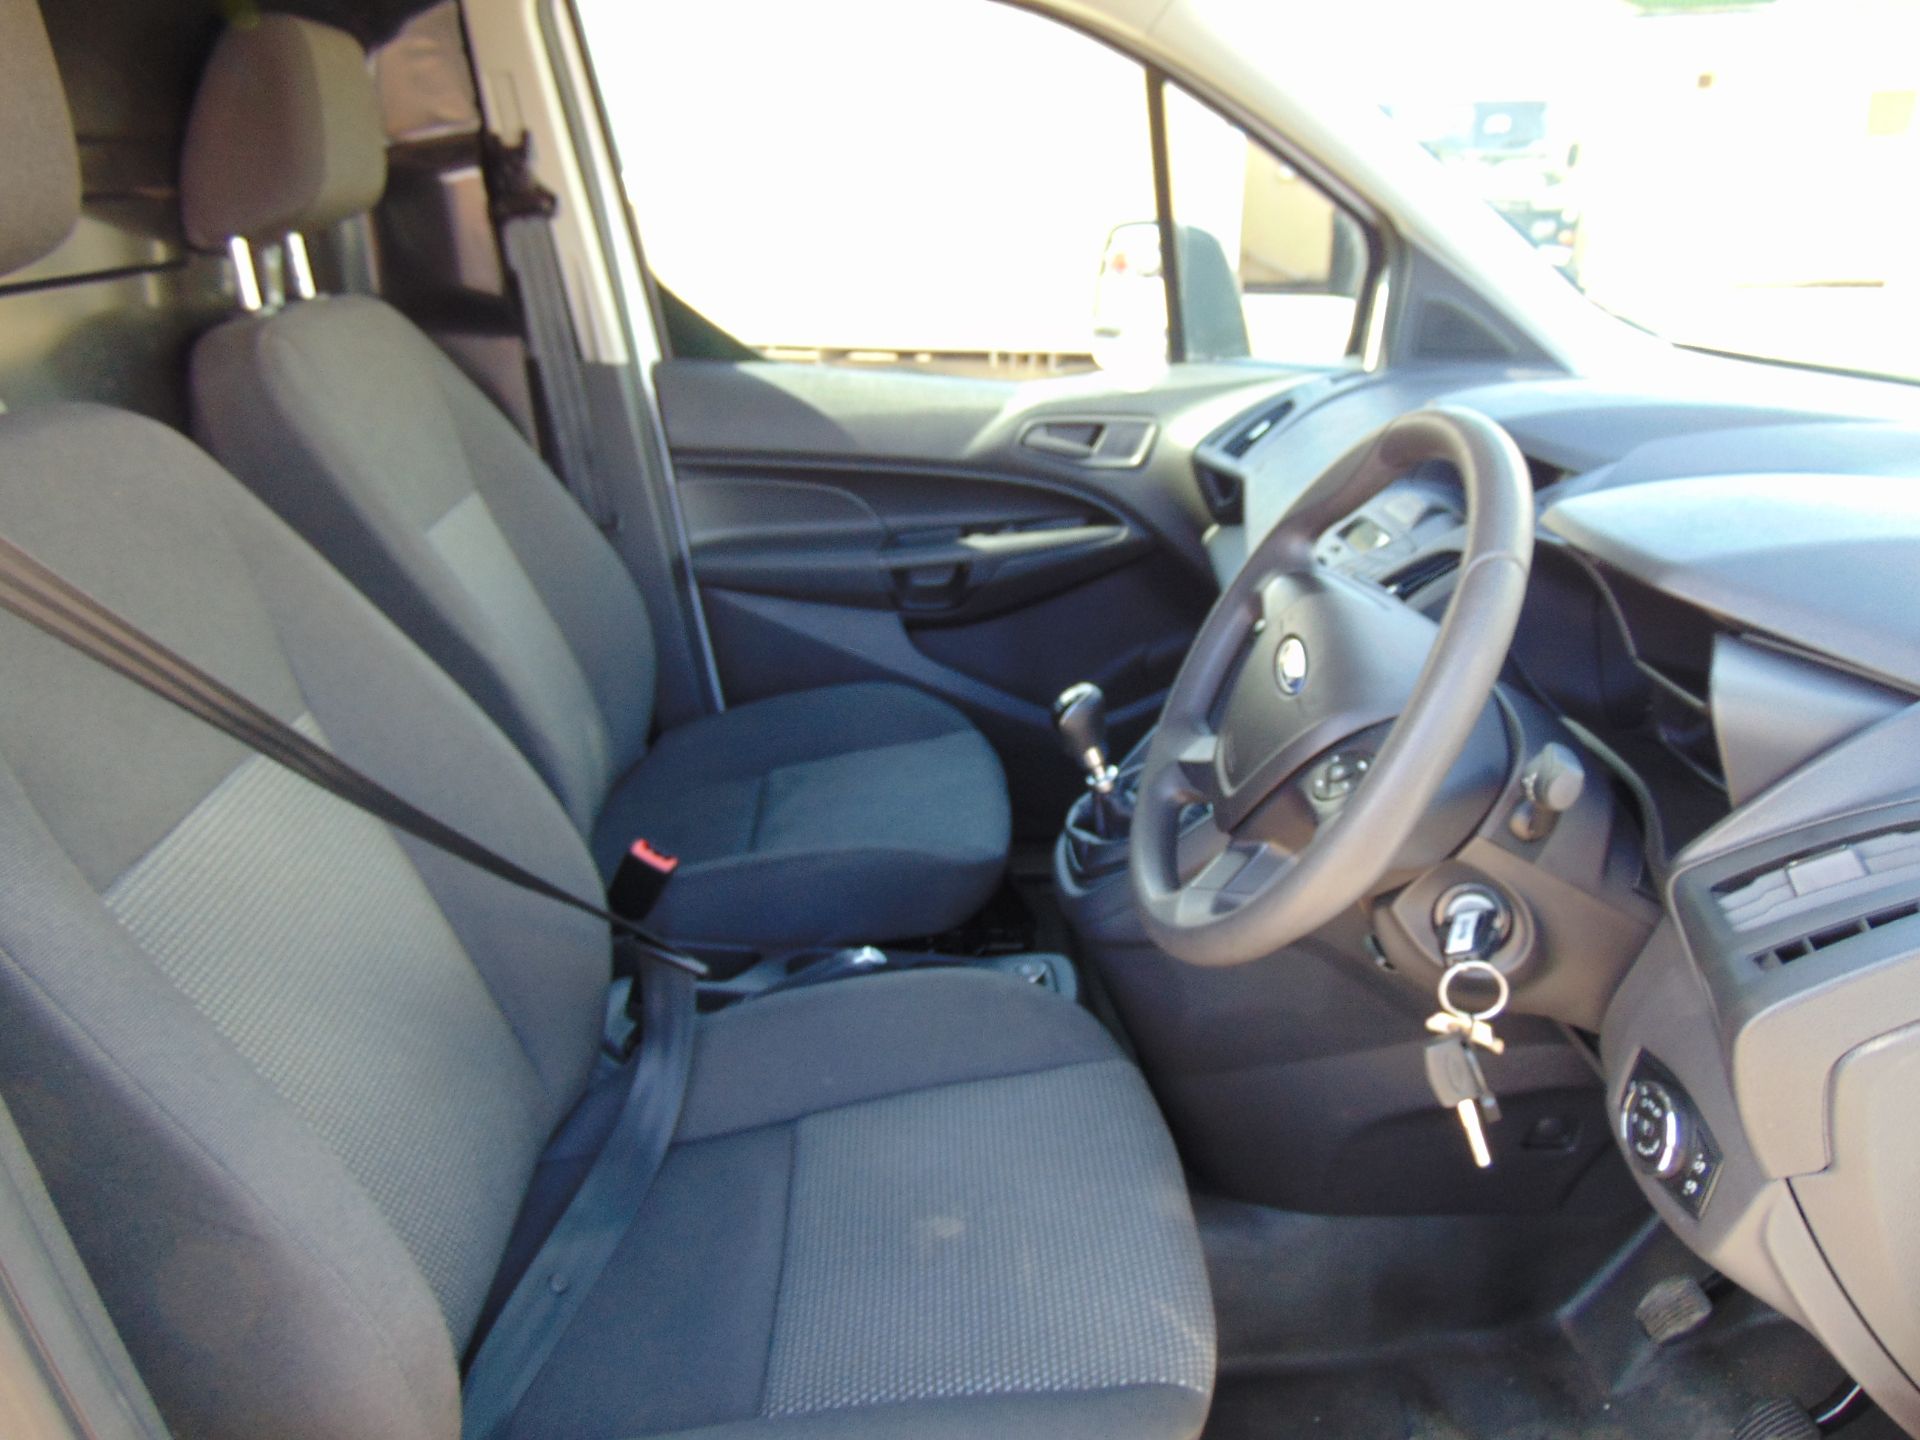 2014 Ford Transit Connect 240 1.6TDCi Panel Van - Image 16 of 16